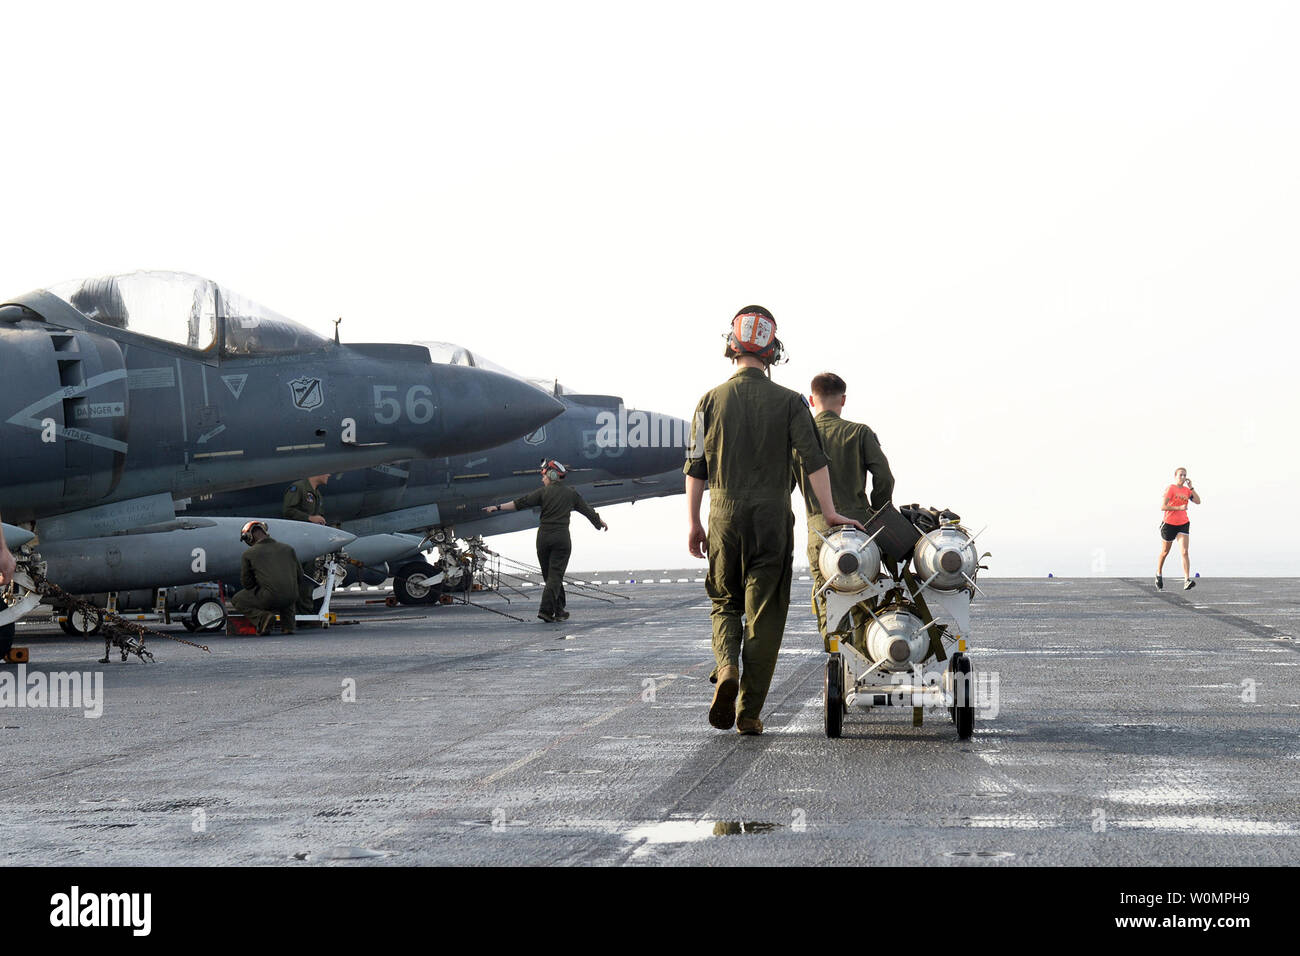 Marines prepare to load ordnance onto an AV-8B Harrier II, assigned to 13th Marine Expeditionary Unit (MEU), on the flight deck of amphibious assault ship USS Boxer (LHD 4) in preparation for missions in support of Operation Inherent Resolve on June 16, 2016. Boxer is the flagship for the Boxer Amphibious Ready Group and, with the embarked 13th Marine Expeditionary Unit, is deployed in support of maritime security operations and theater security cooperation efforts in the U.S. 5th Fleet area of operations. Photo by Brian Caracci/U.S. Navy/UPI Stock Photo